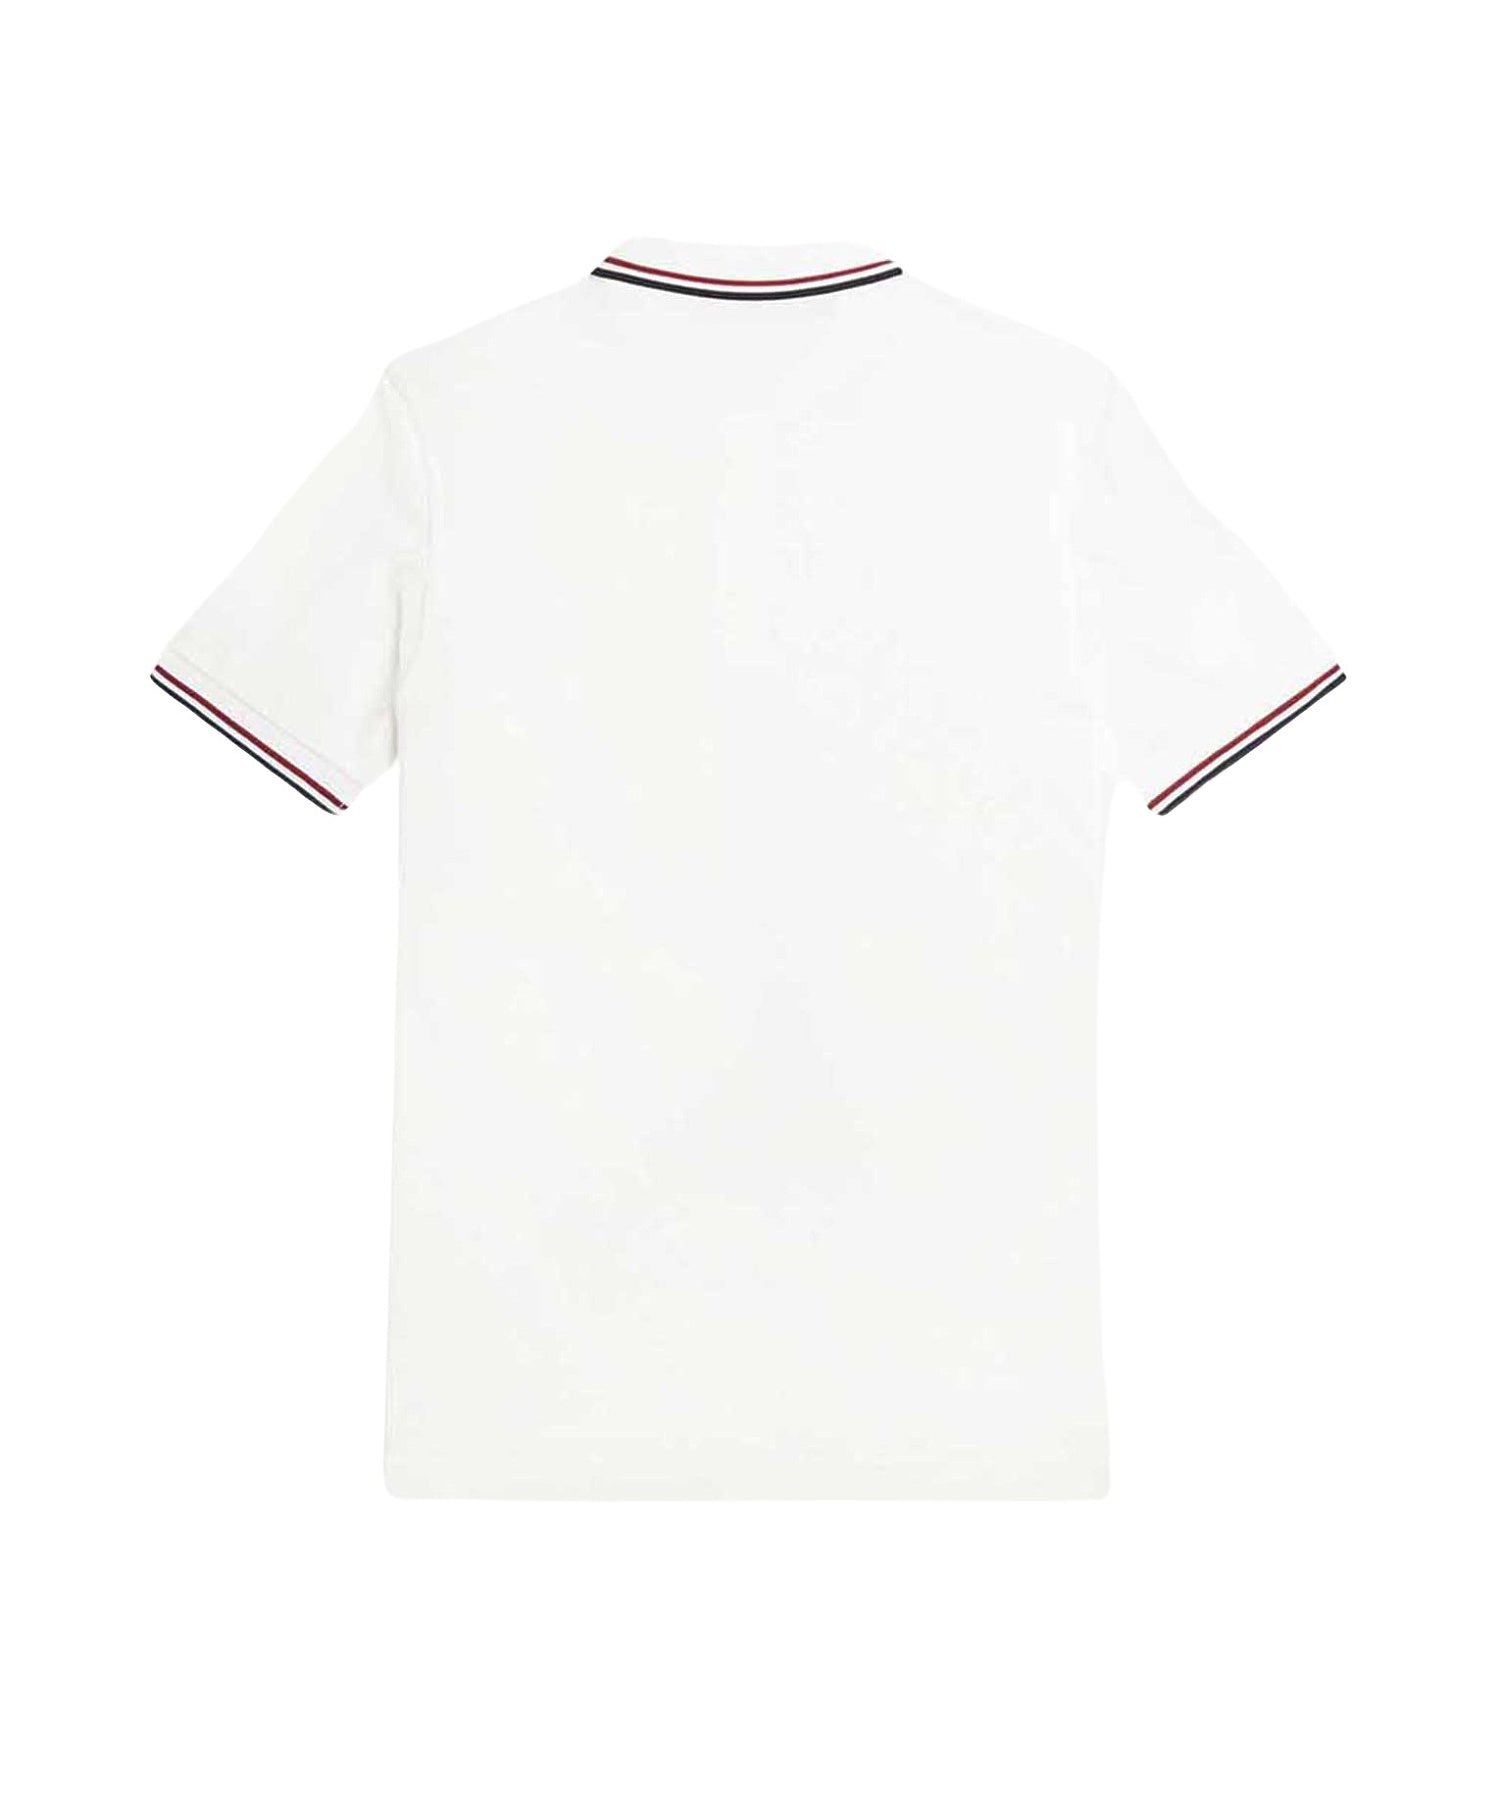 FRED PERRY/フレッドペリー/TWIN TIPPED FRED PERRY SHIRT/M3600/T60